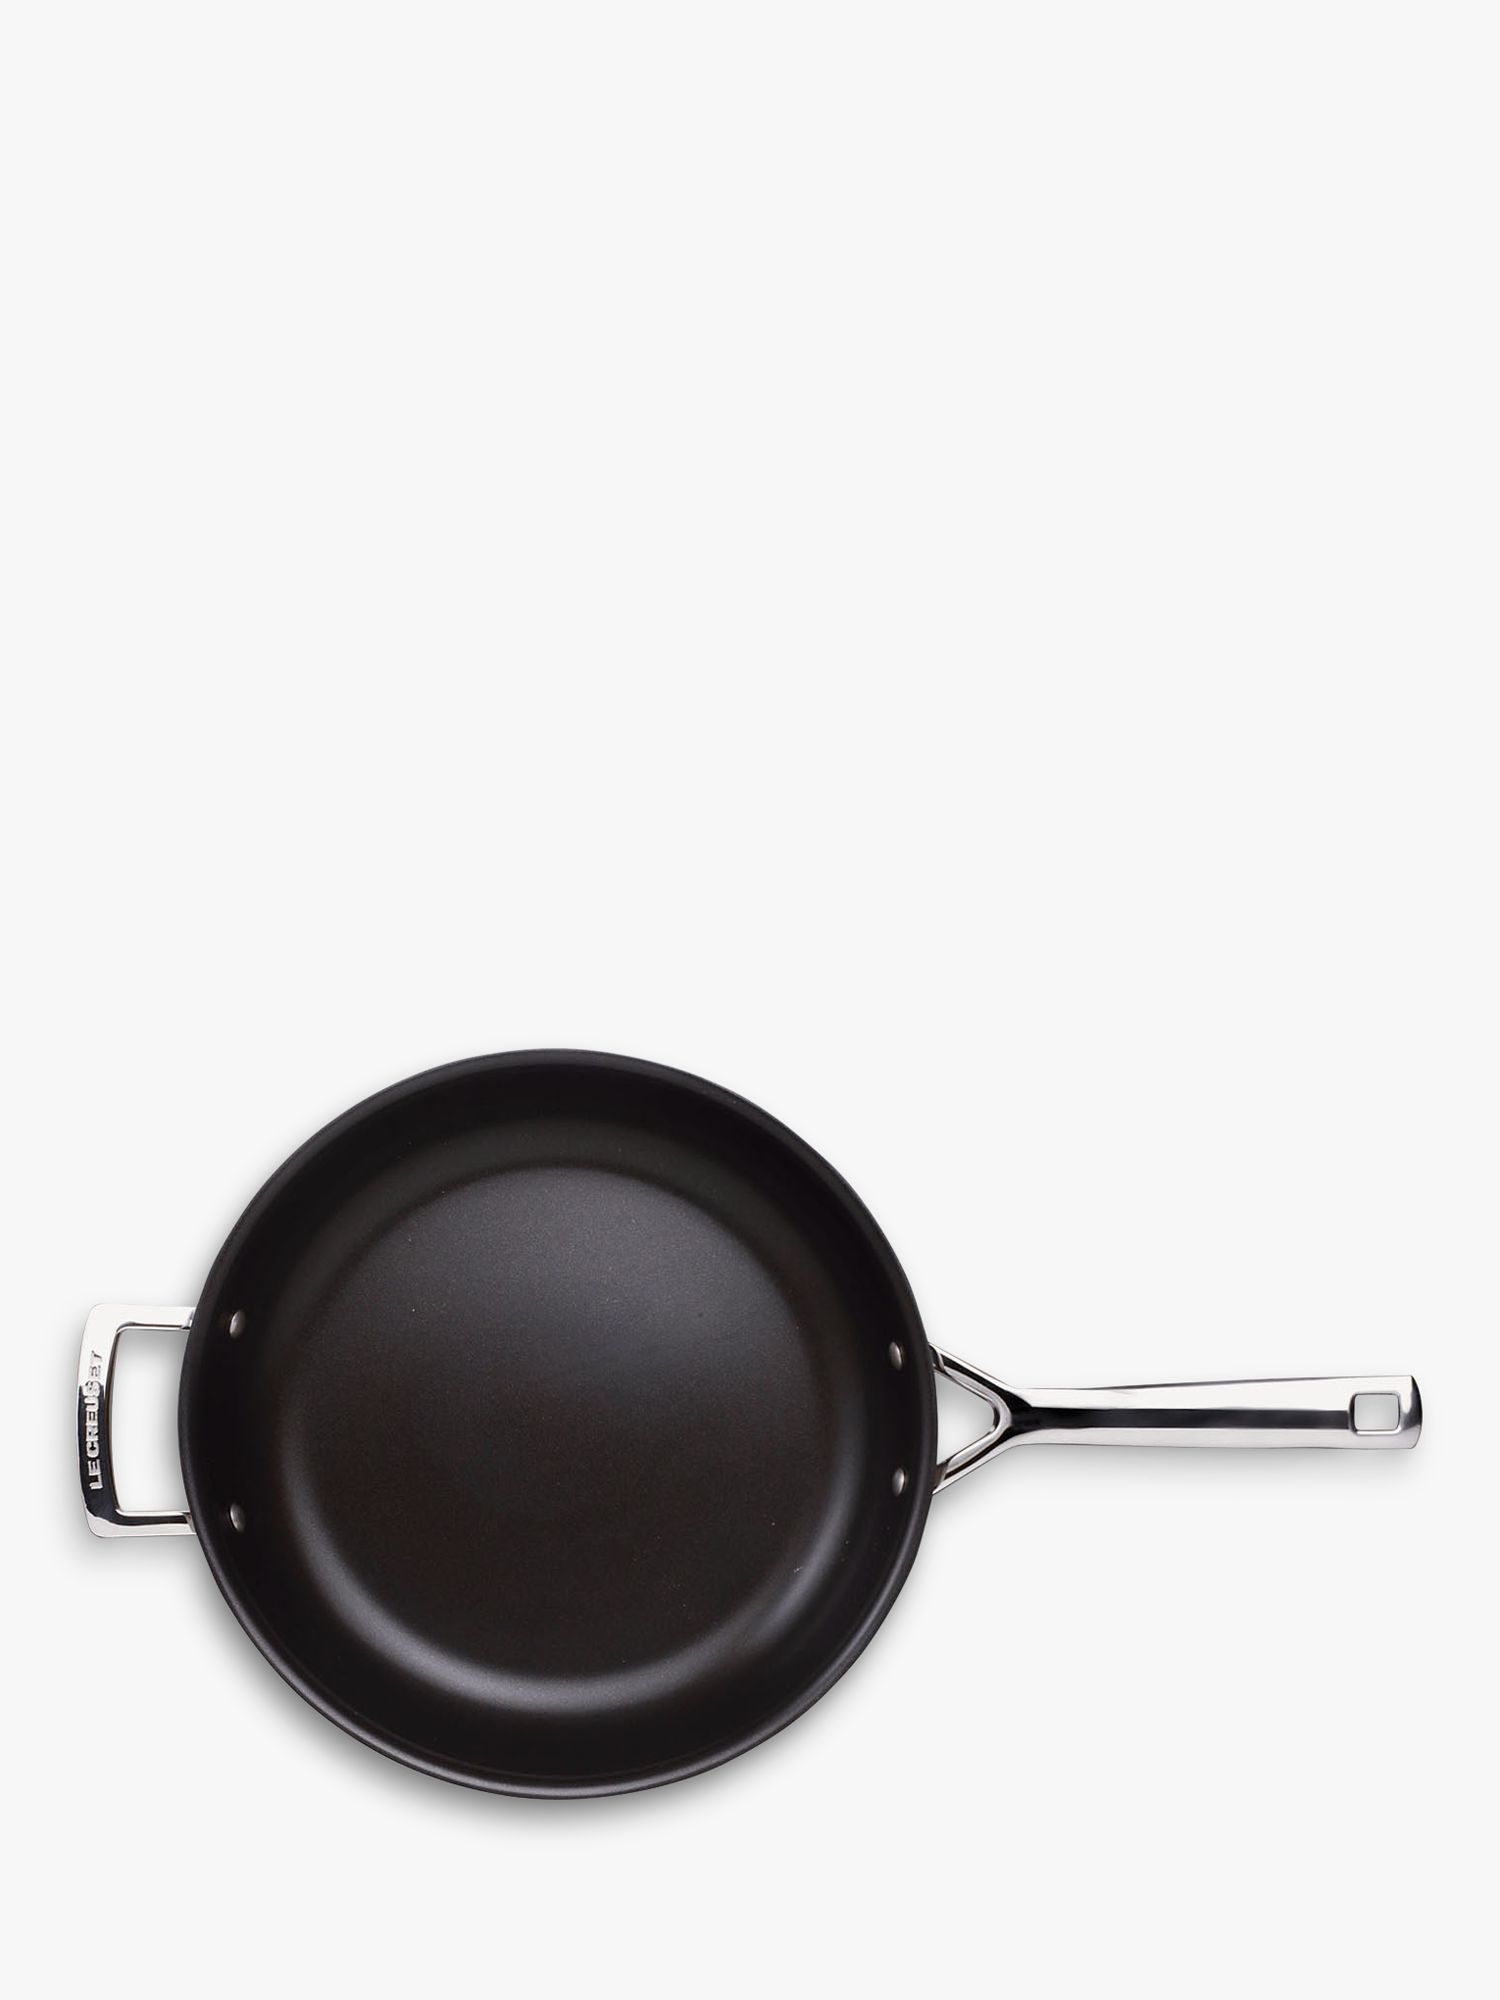 Le Creuset Tri-Ply Stainless Steel Nonstick Fry Pans, Set of 2